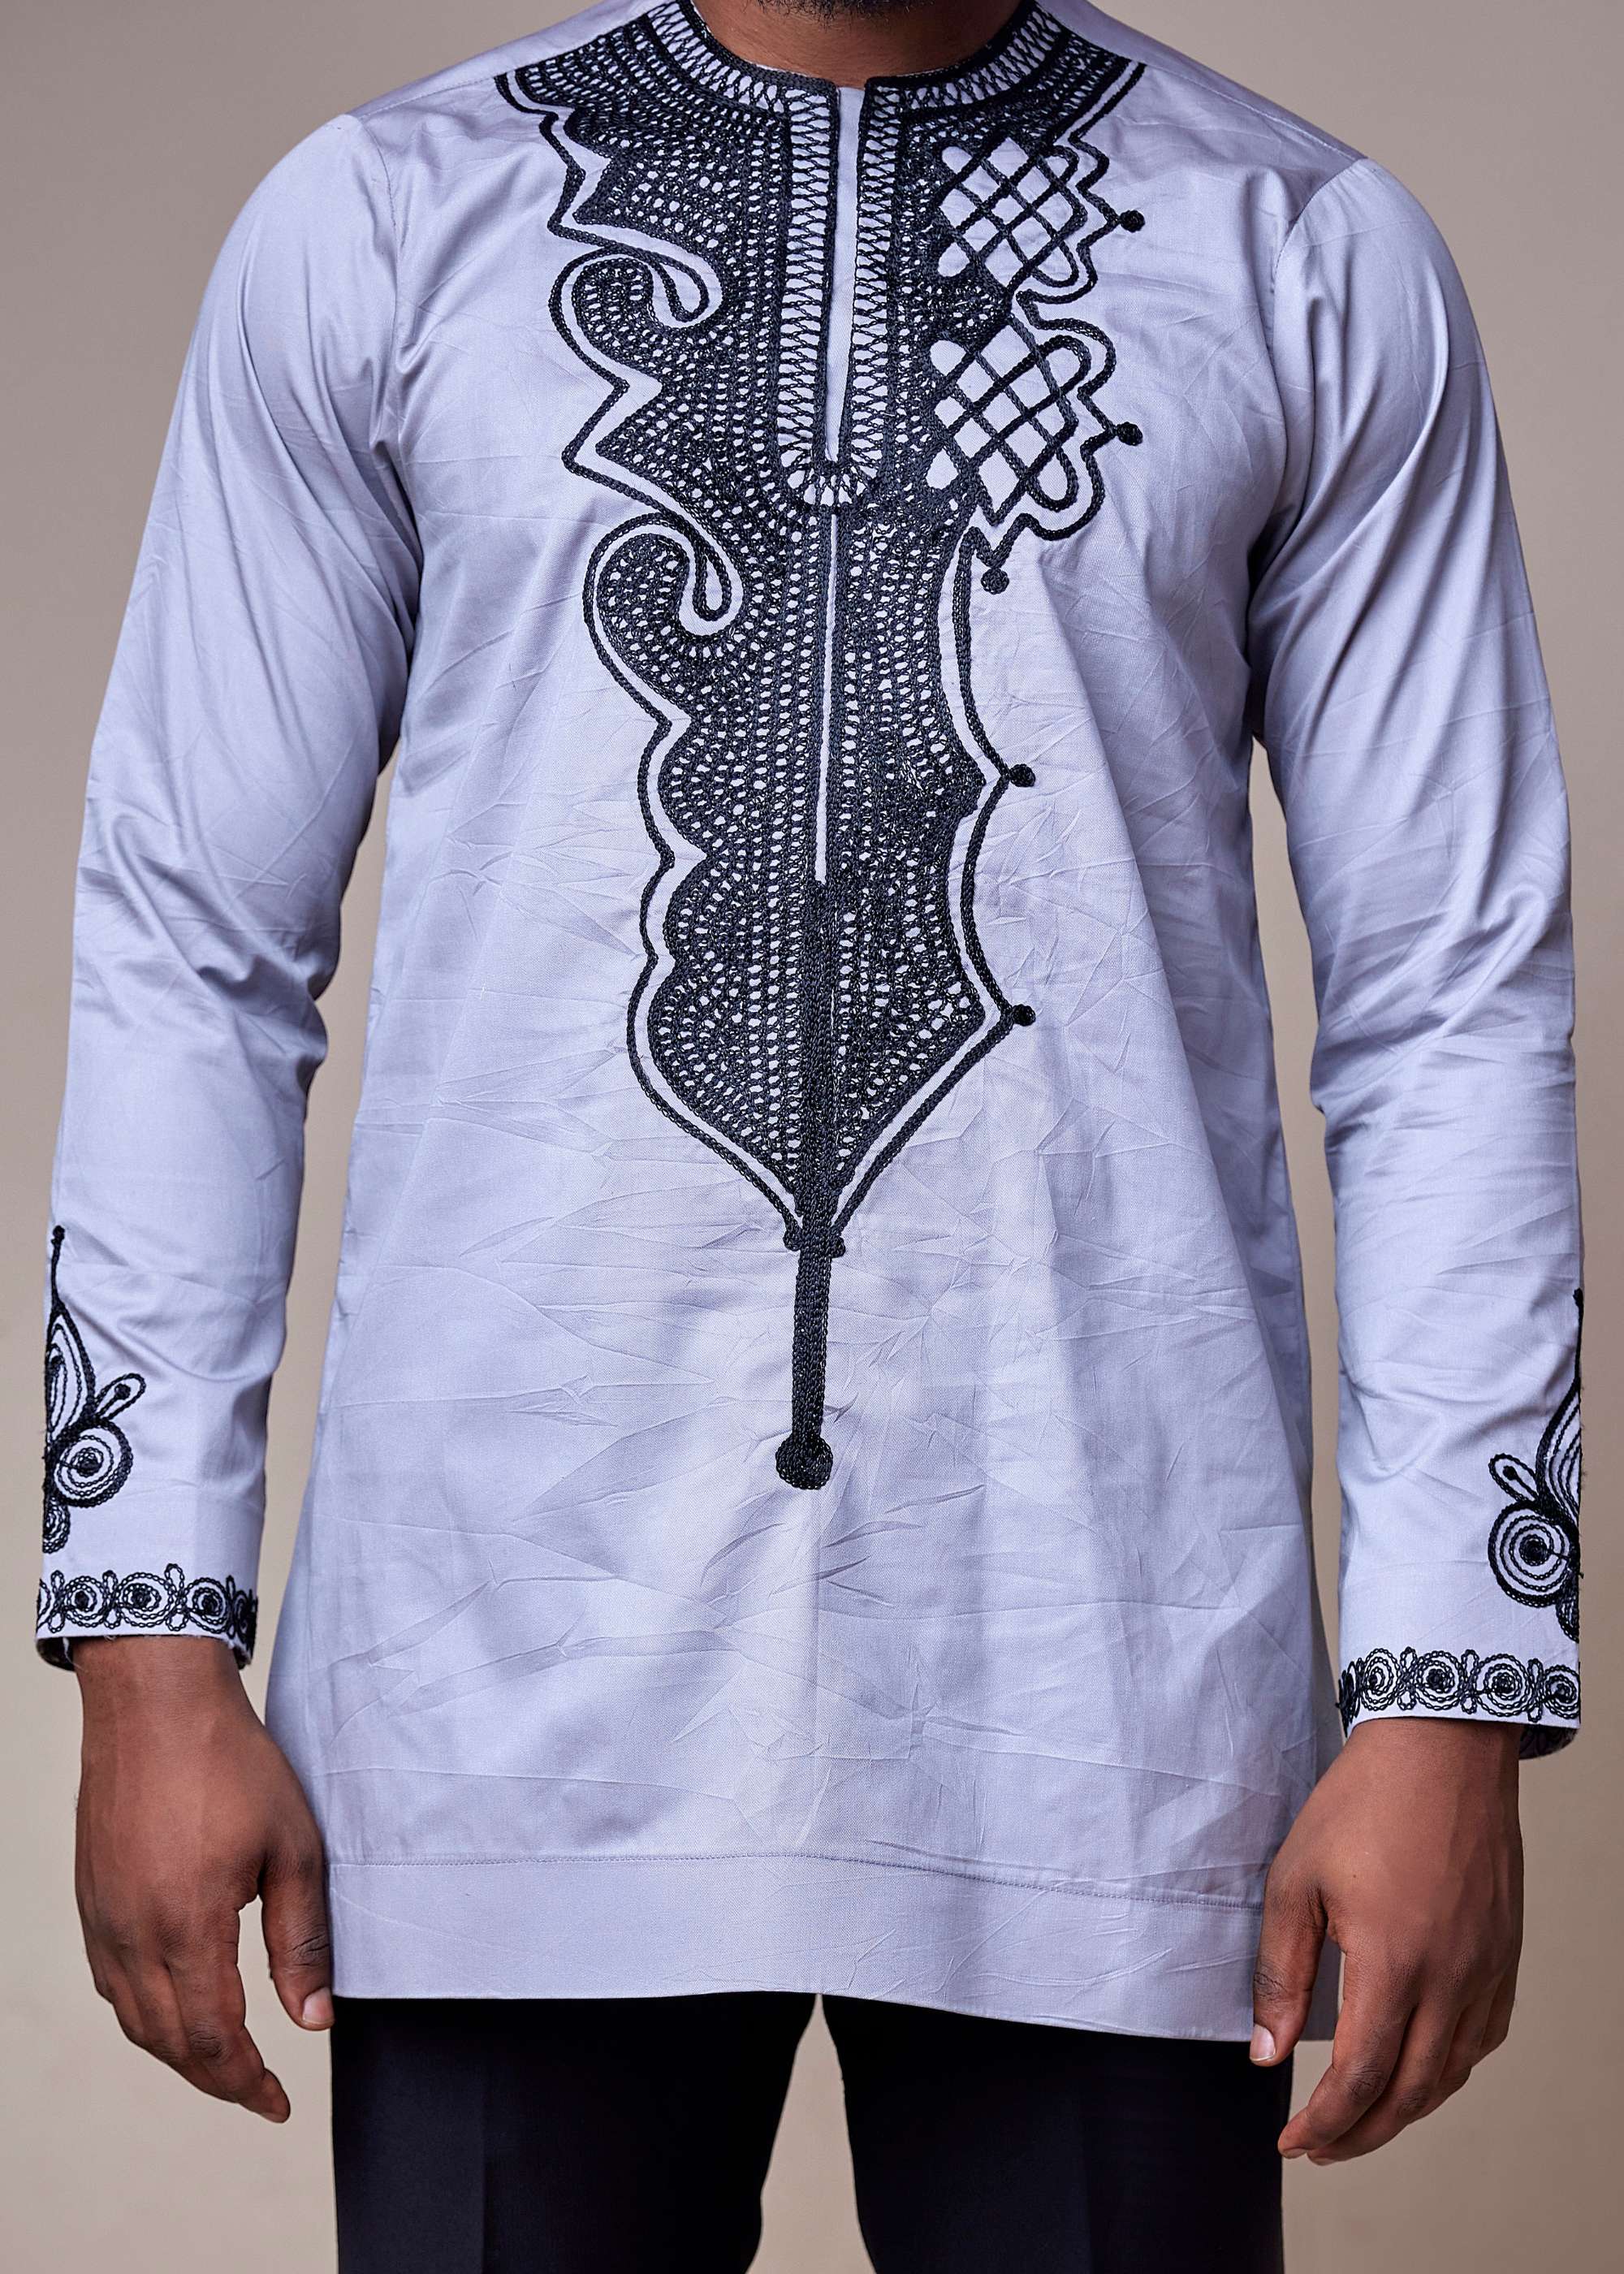 Oloye Embroidered Shirt (Green)